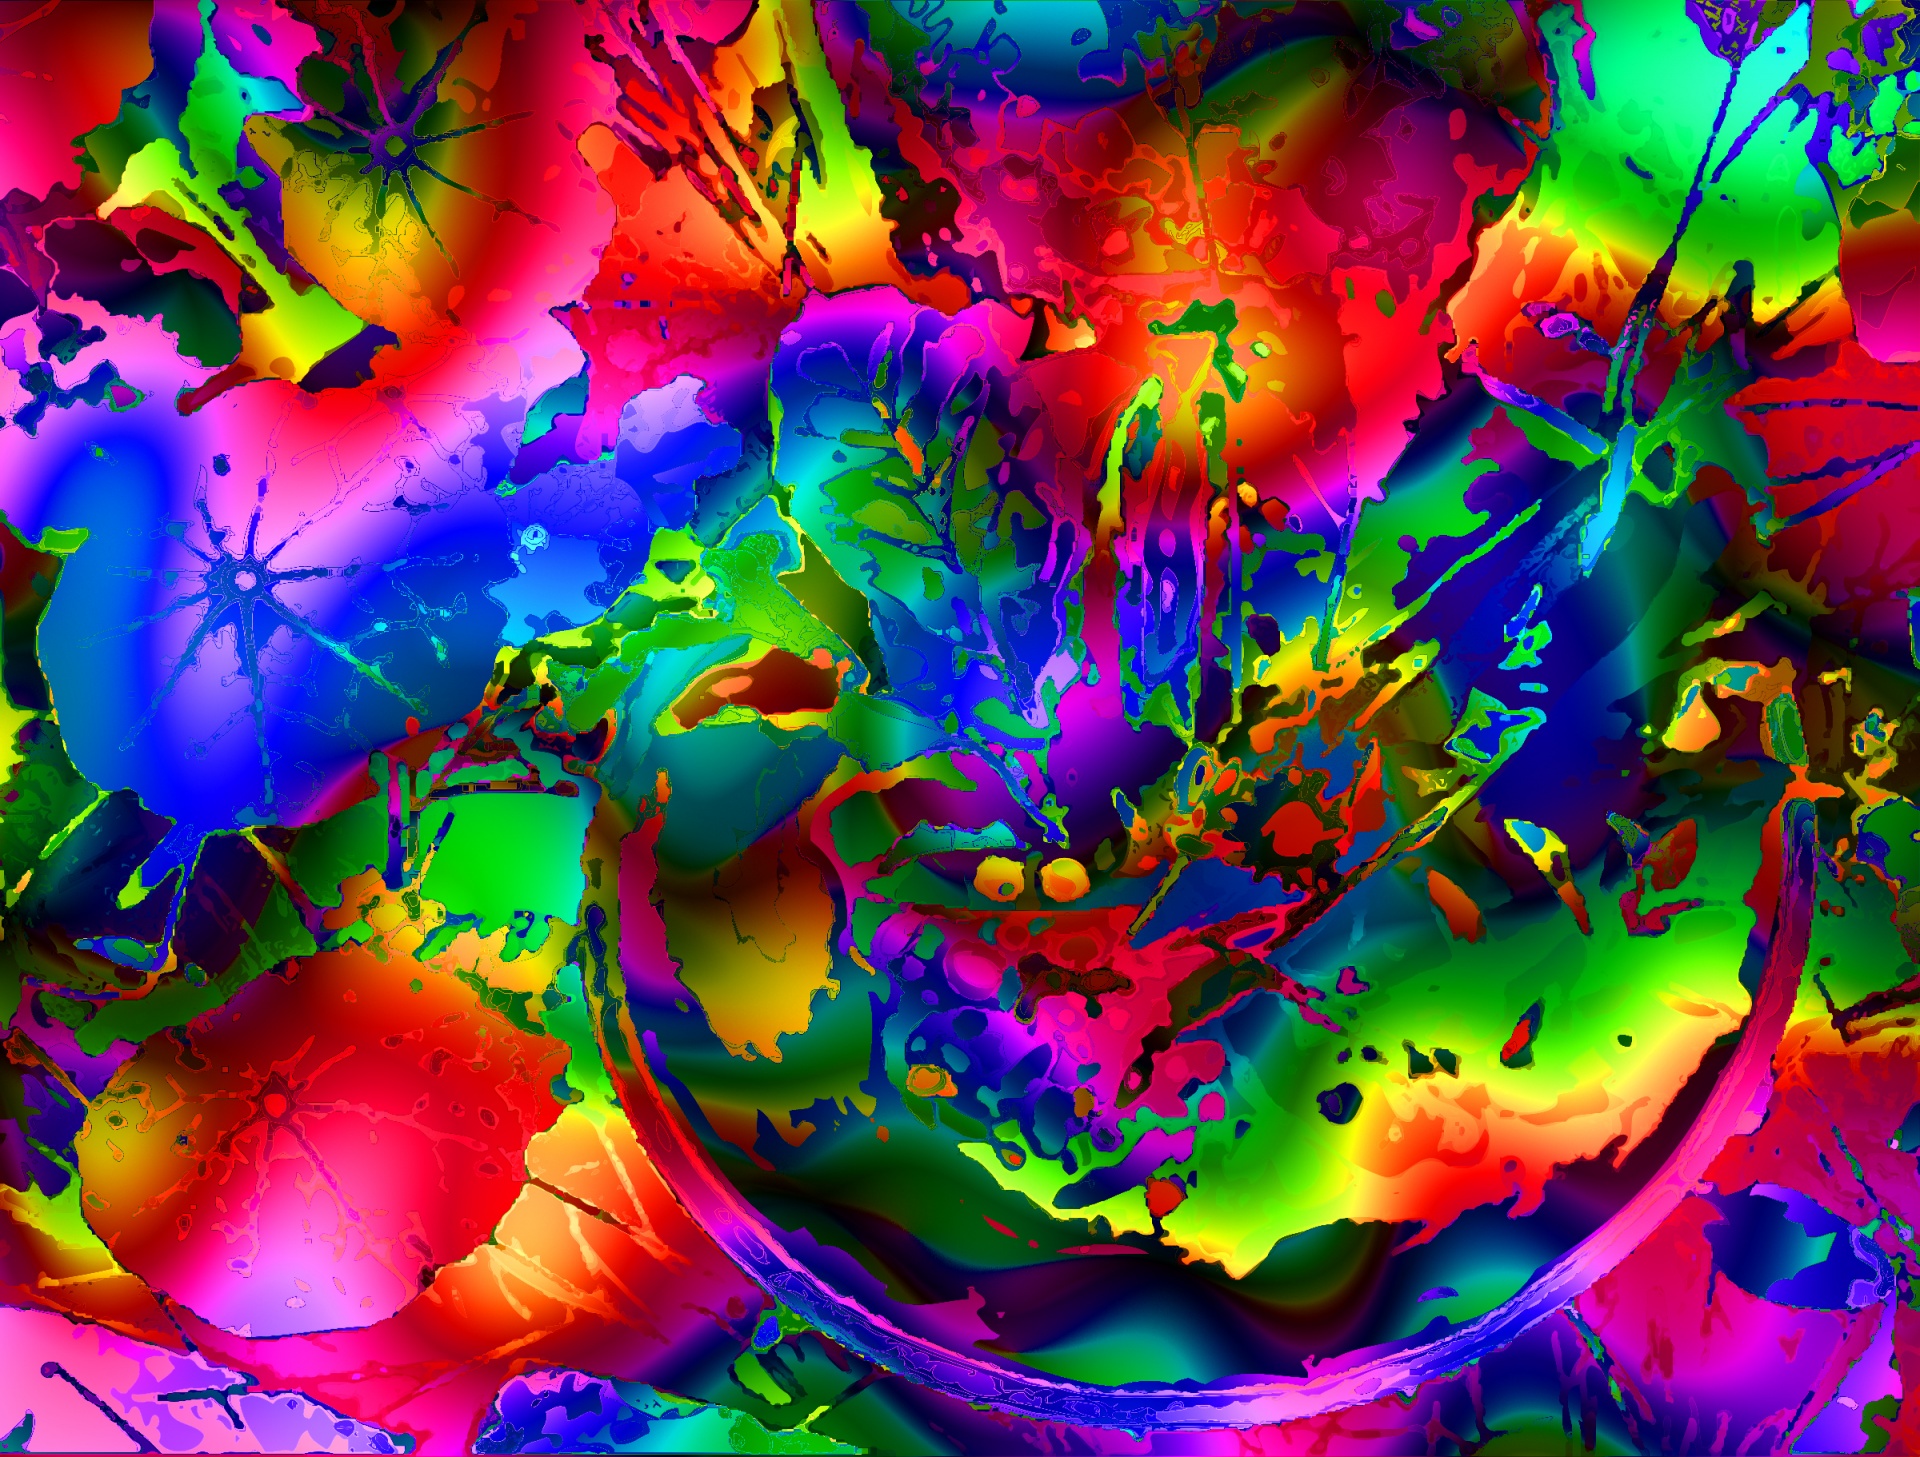 Psychedelic Colorful Background 2 Free Stock Photo ...